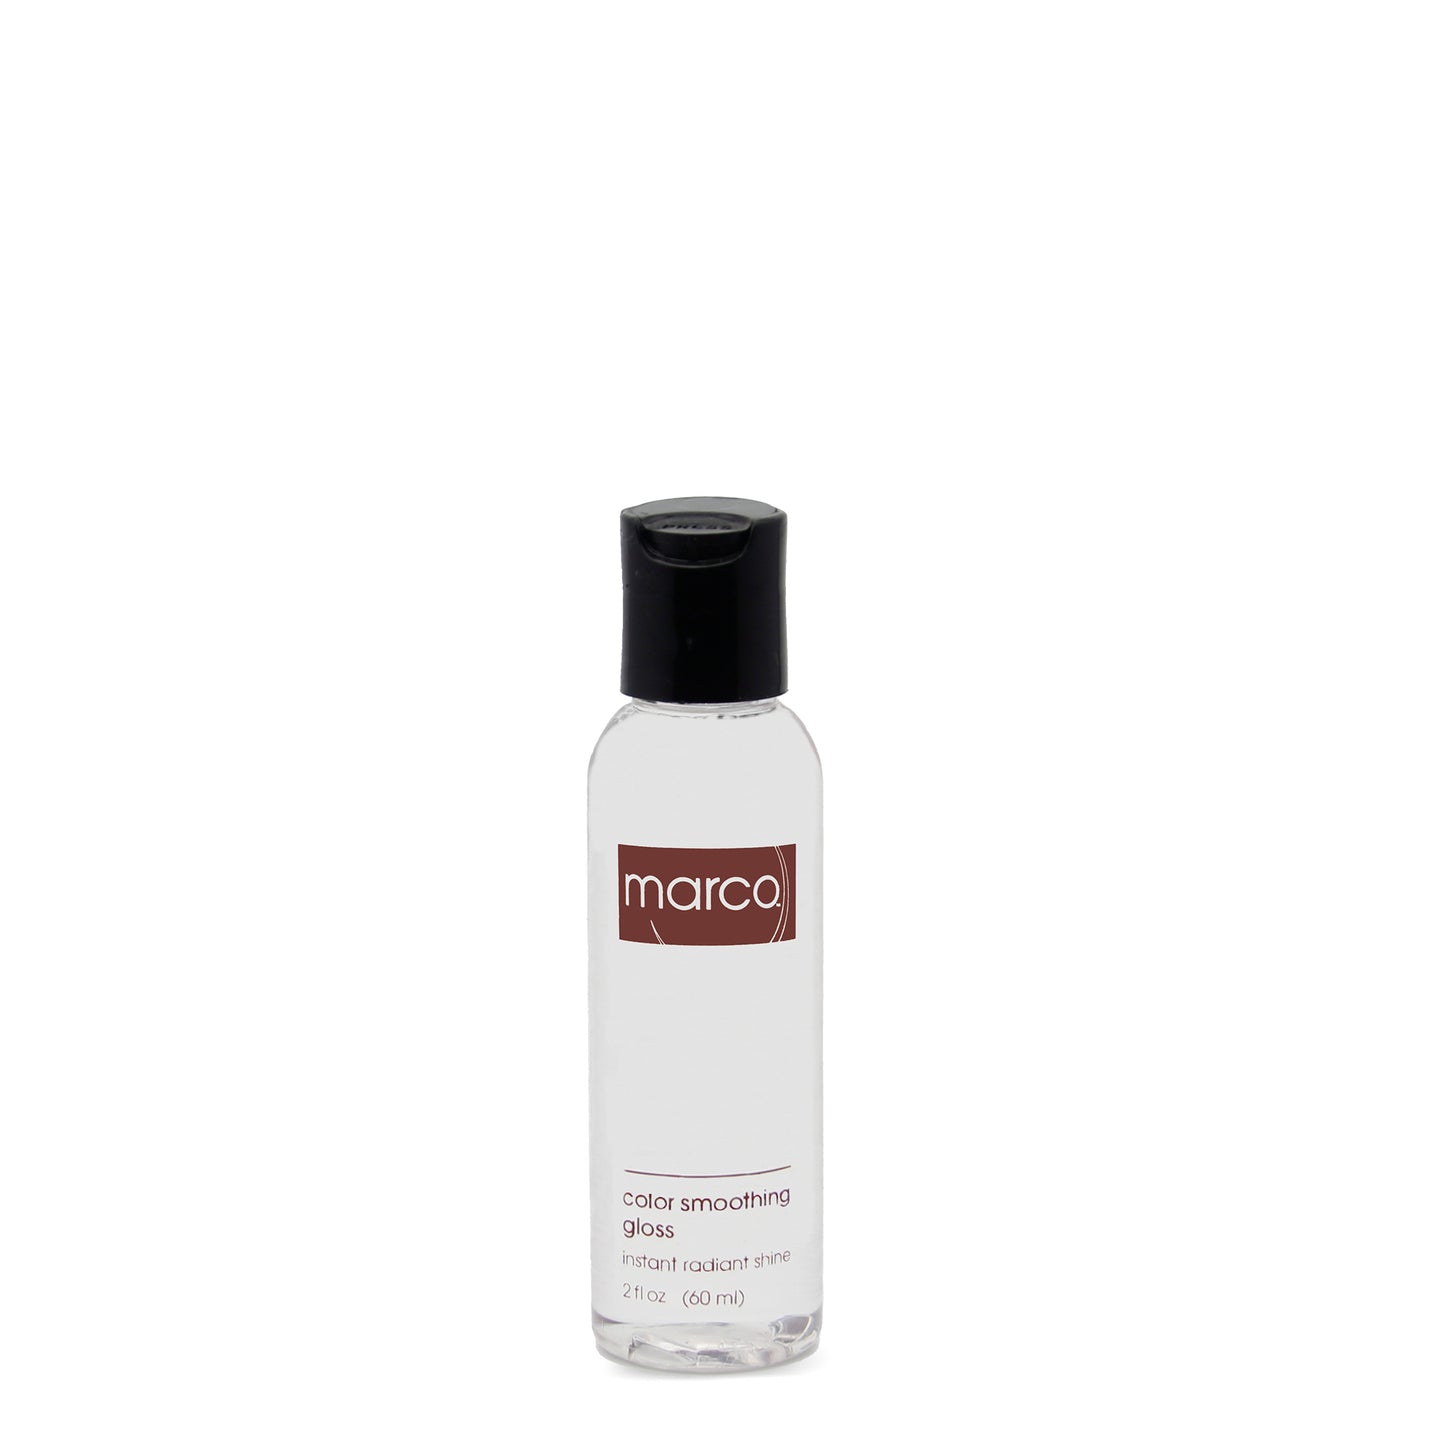 Clear bottle with translucent product, “marco, color smoothing gloss, instant radiant shine”